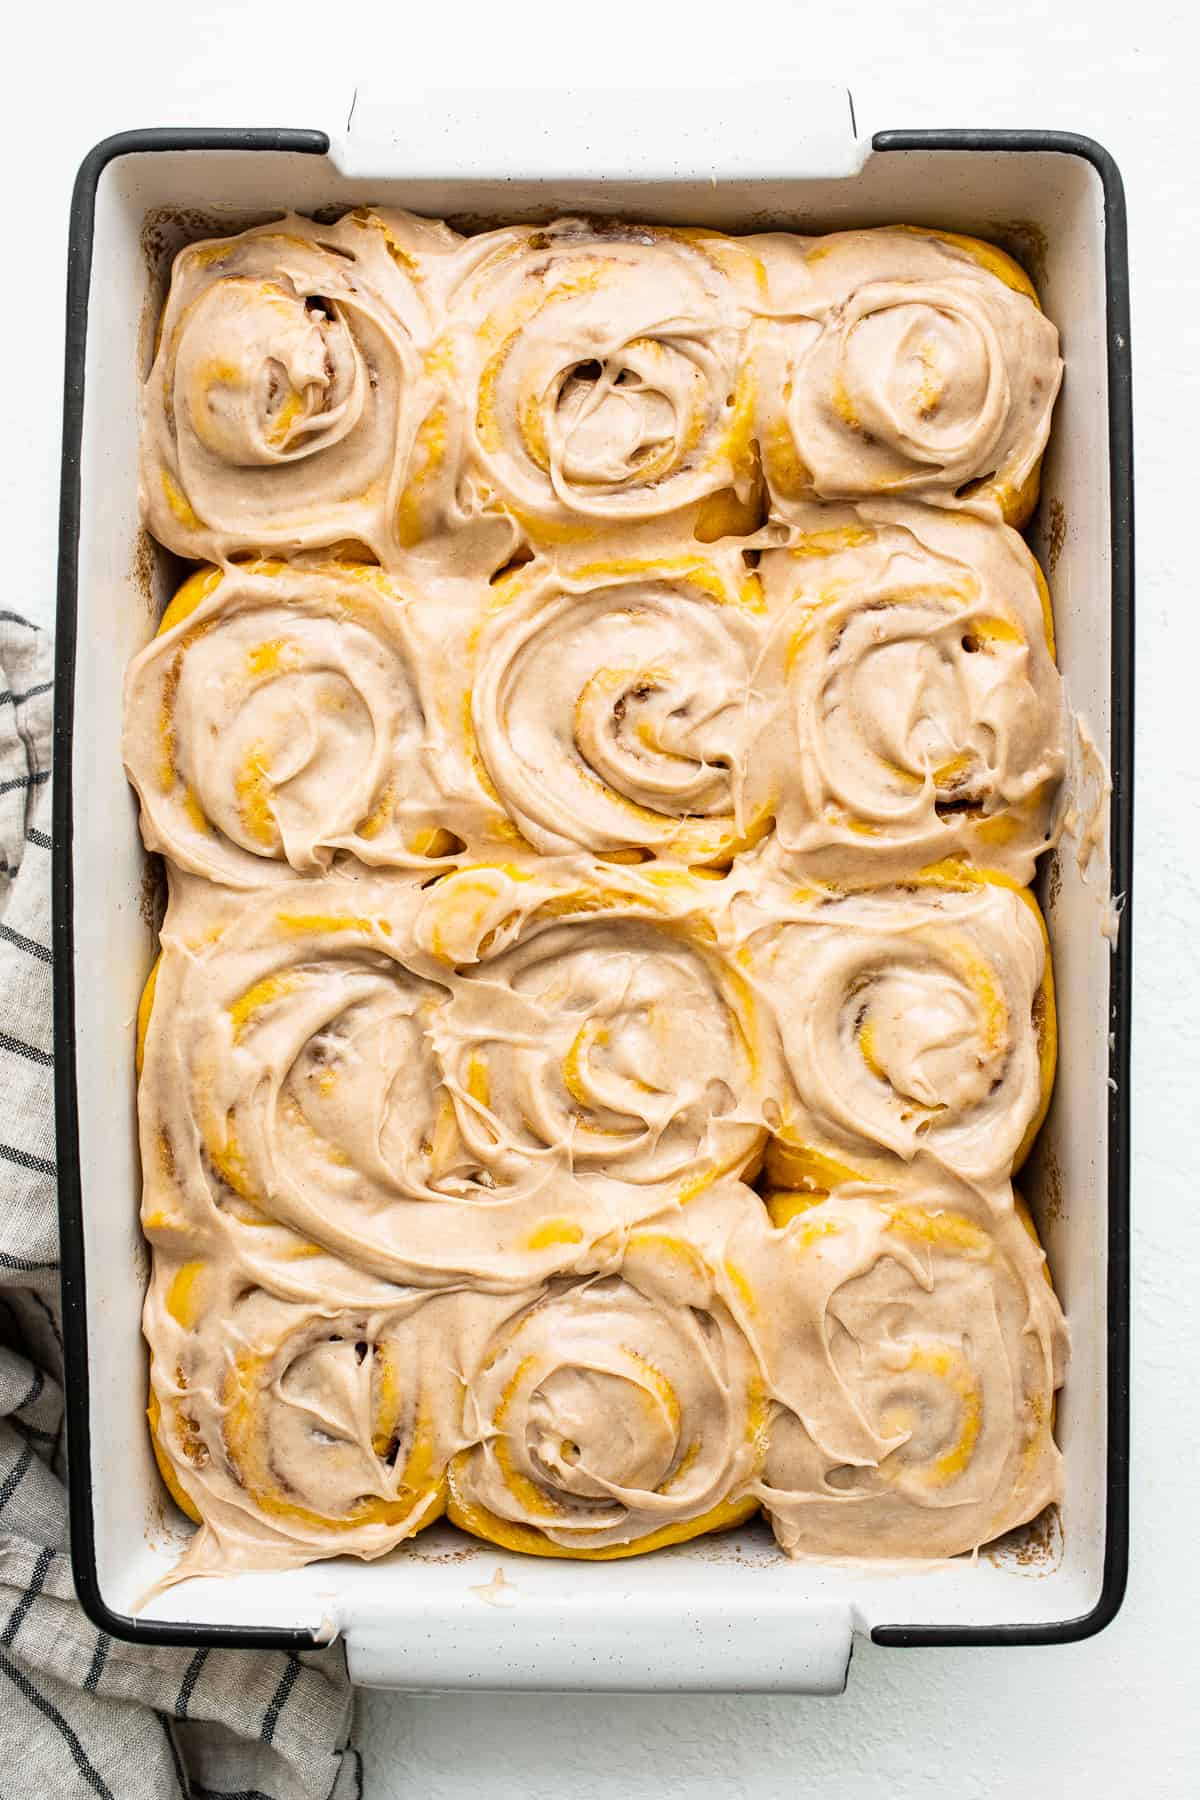 Pumpkin cinnamon rolls topped with a cinnamon cream cheese frosting in a baking dish.